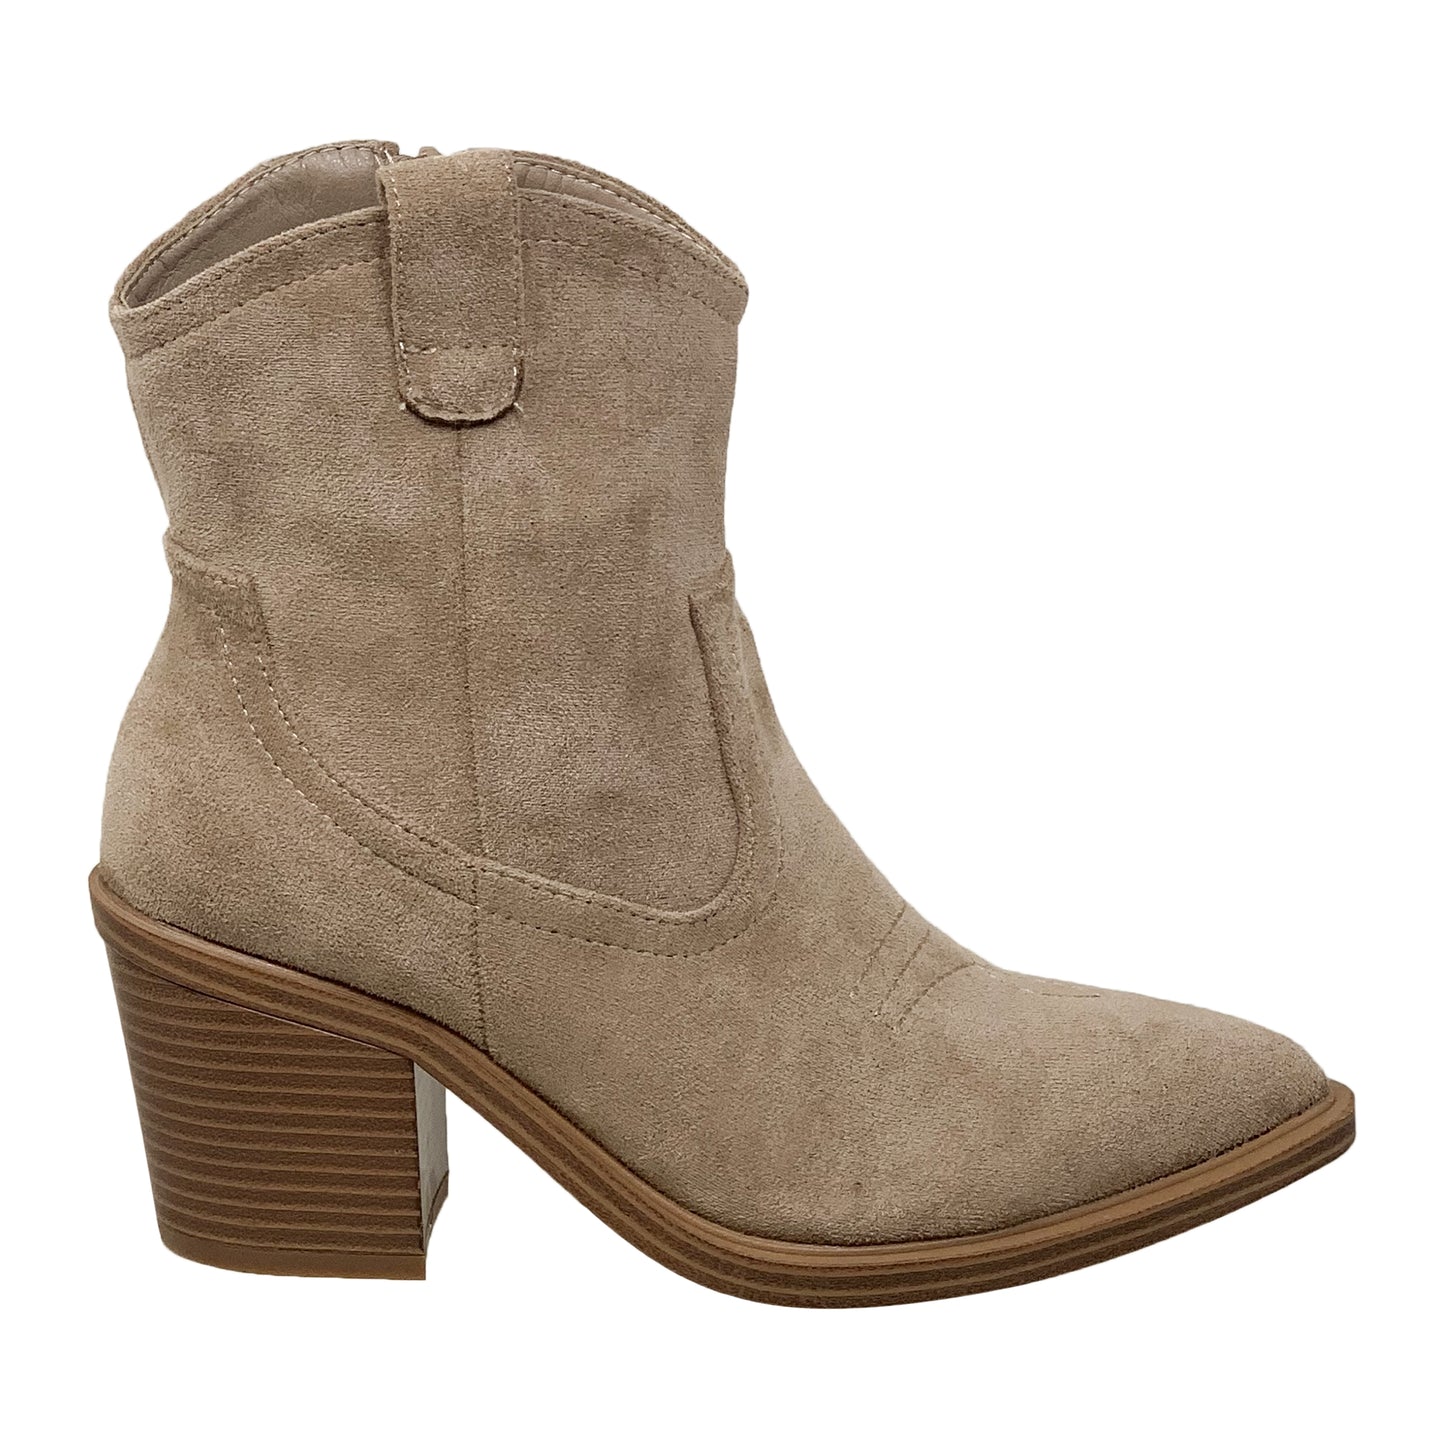 Western Ankle Booties Stitched Cowboy Toe Side Zipper Closure Taupe